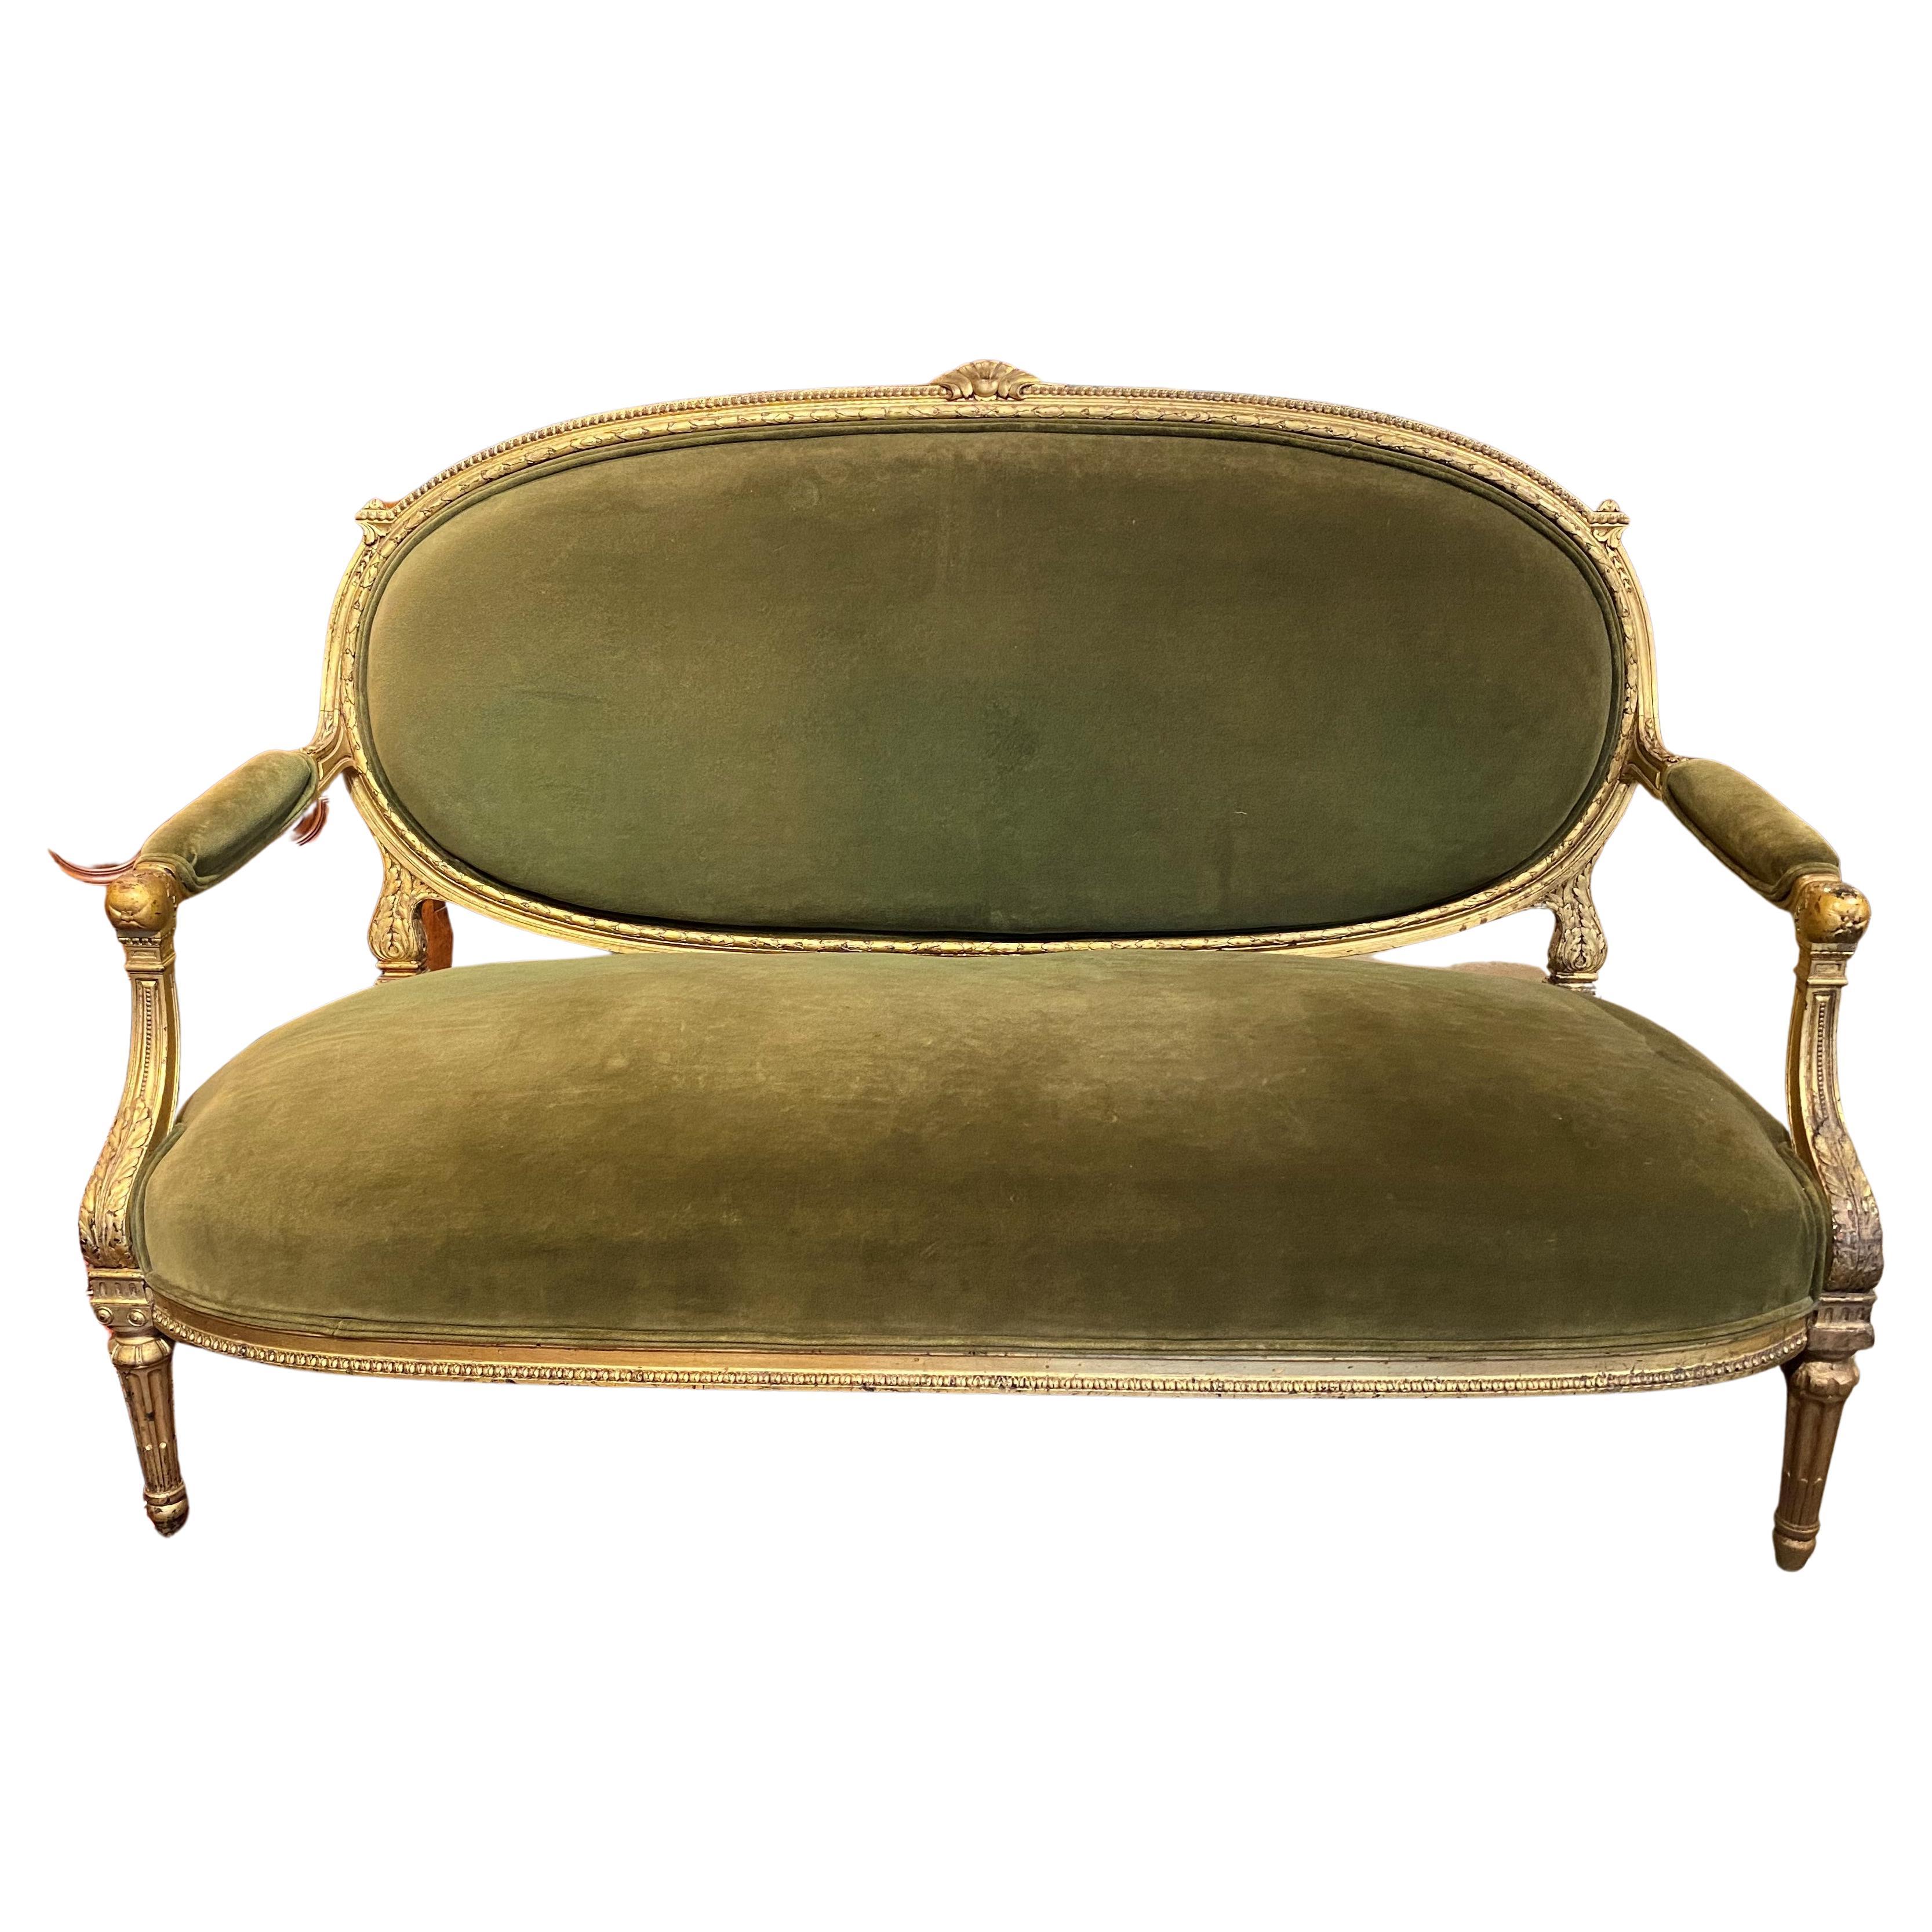 Vintage French Louis XVI Style Green Upholstered Giltwood Sofa or Settee